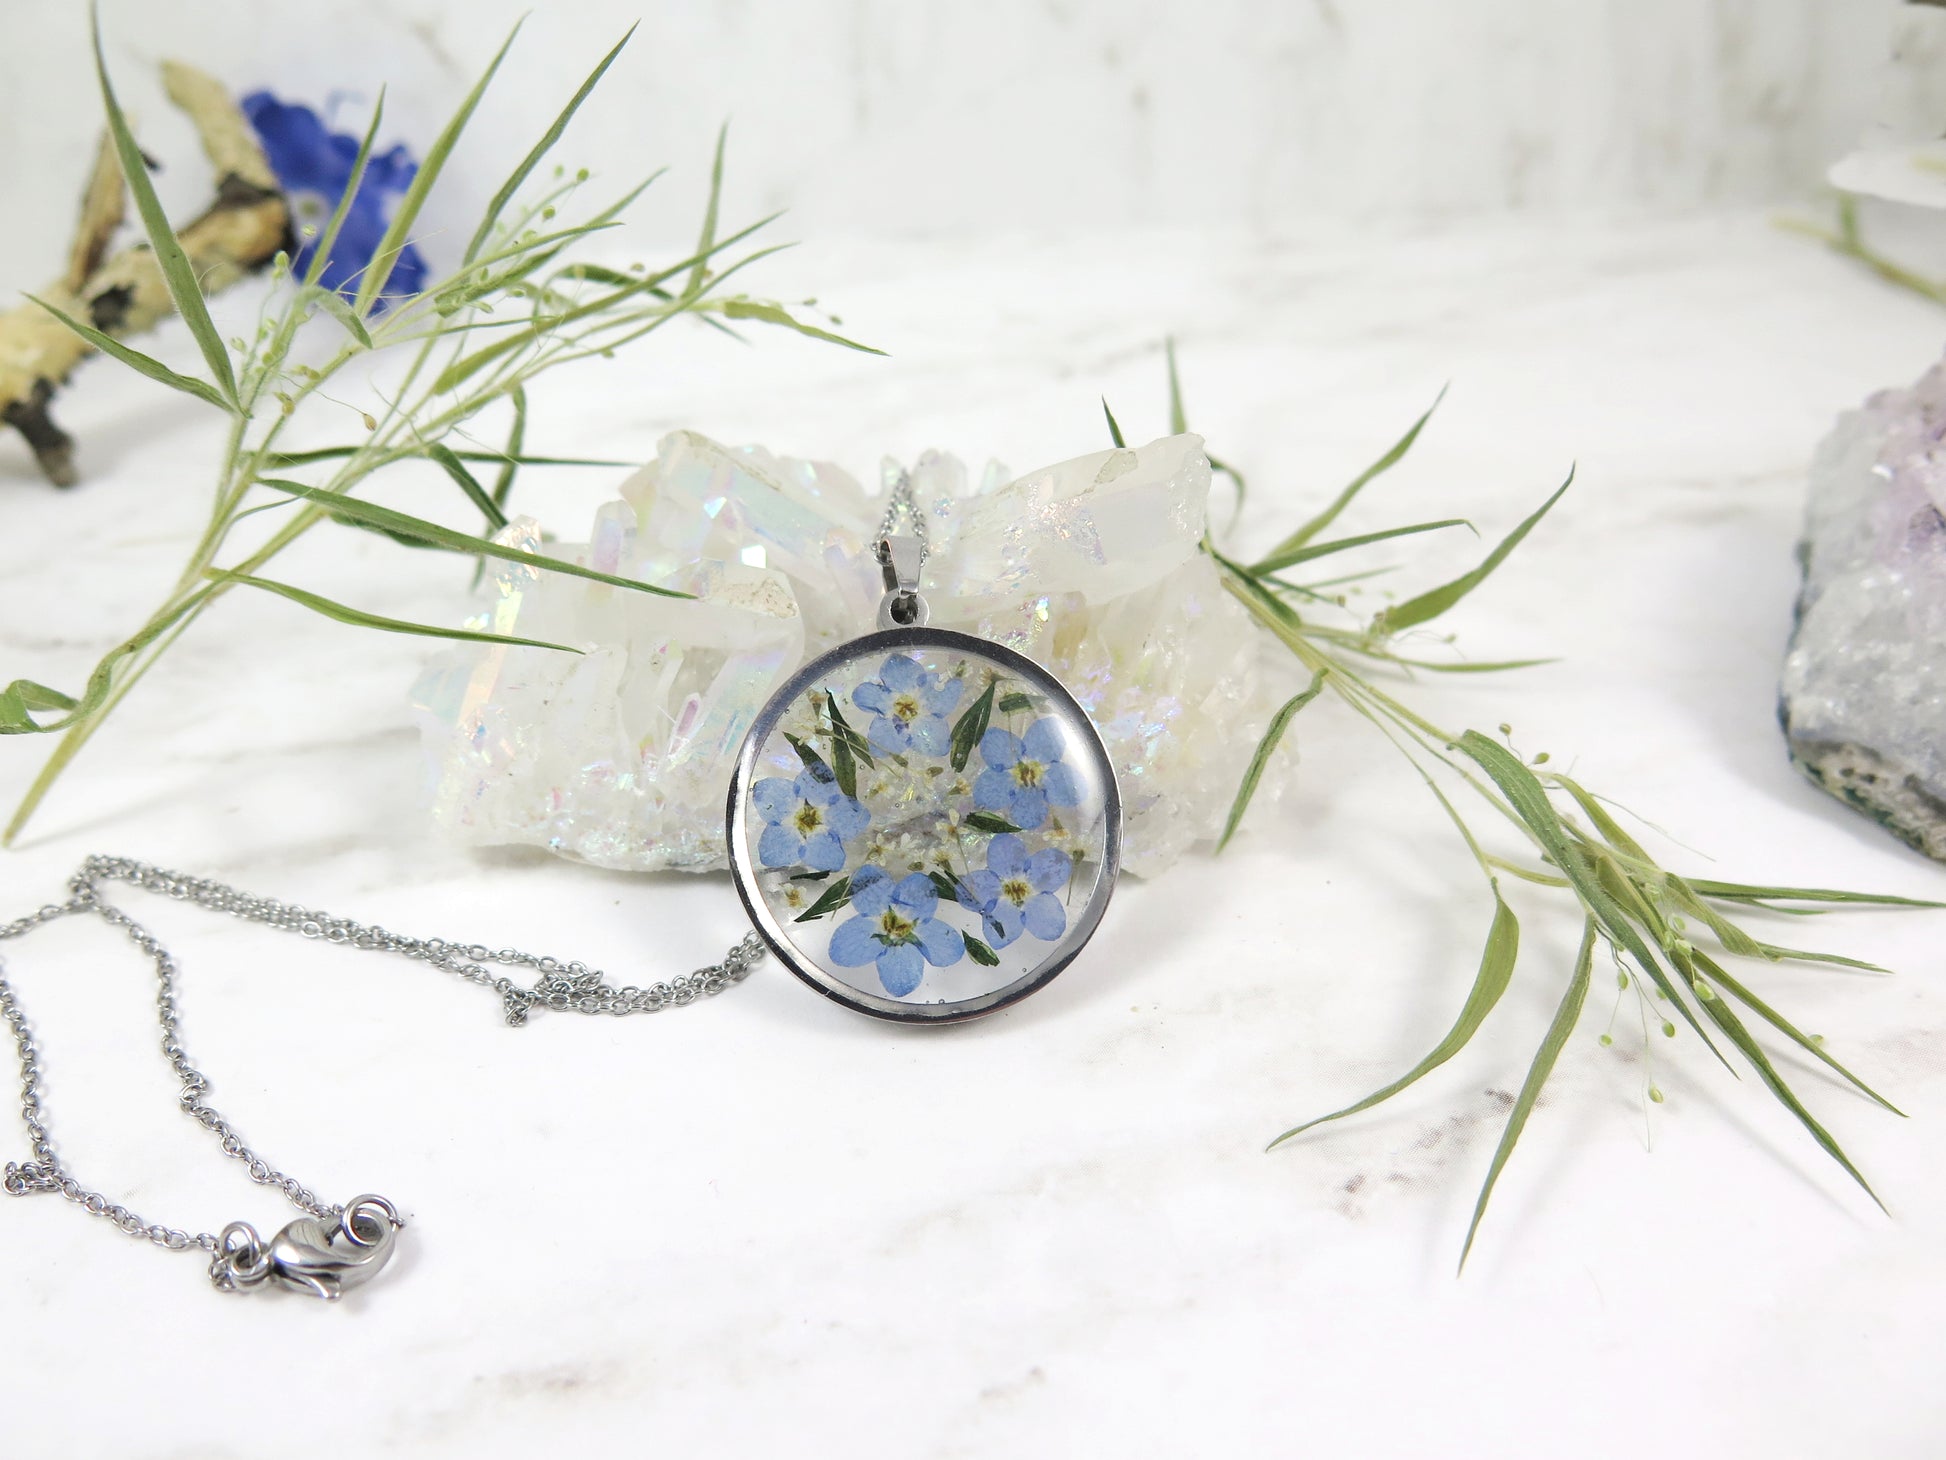 Jewelry Made by Me Resin Mix - Ins Dried Flowers